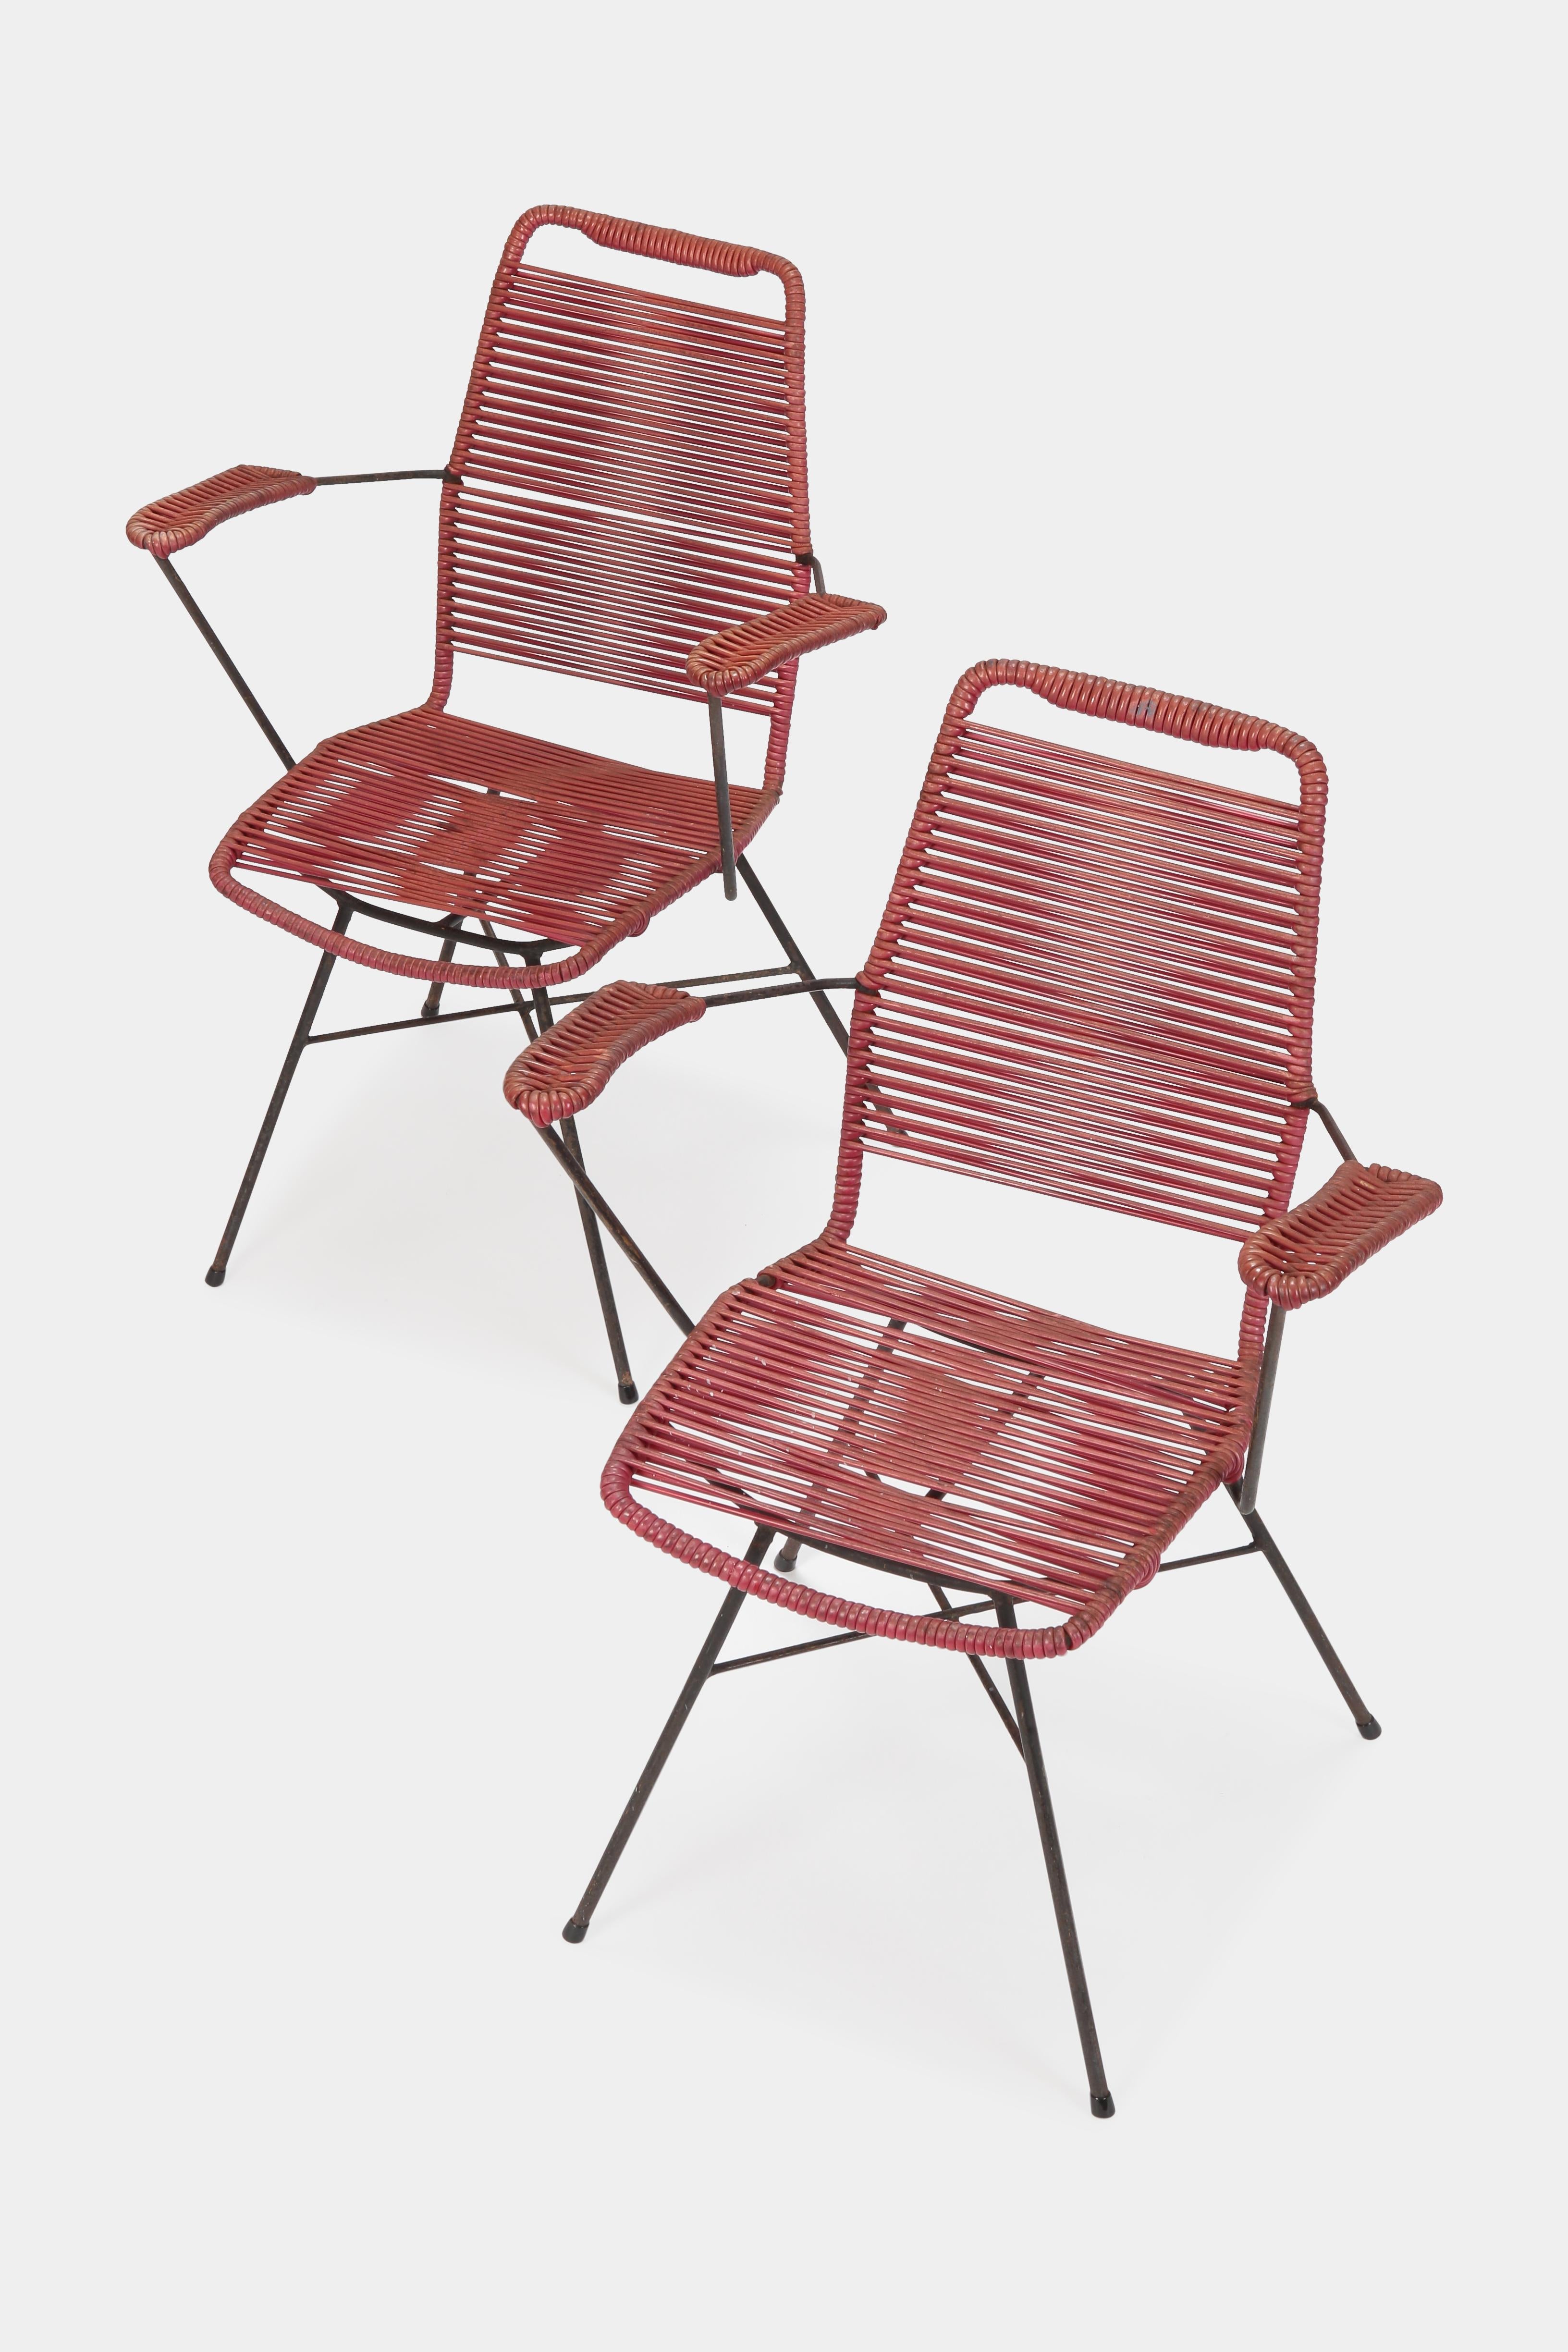 Attributed Gastone Rinaldi garden chairs manufactured in the 1950s in Italy. Red plastic strings attached to a black lacquered metal frame in beautiful vintage condition.